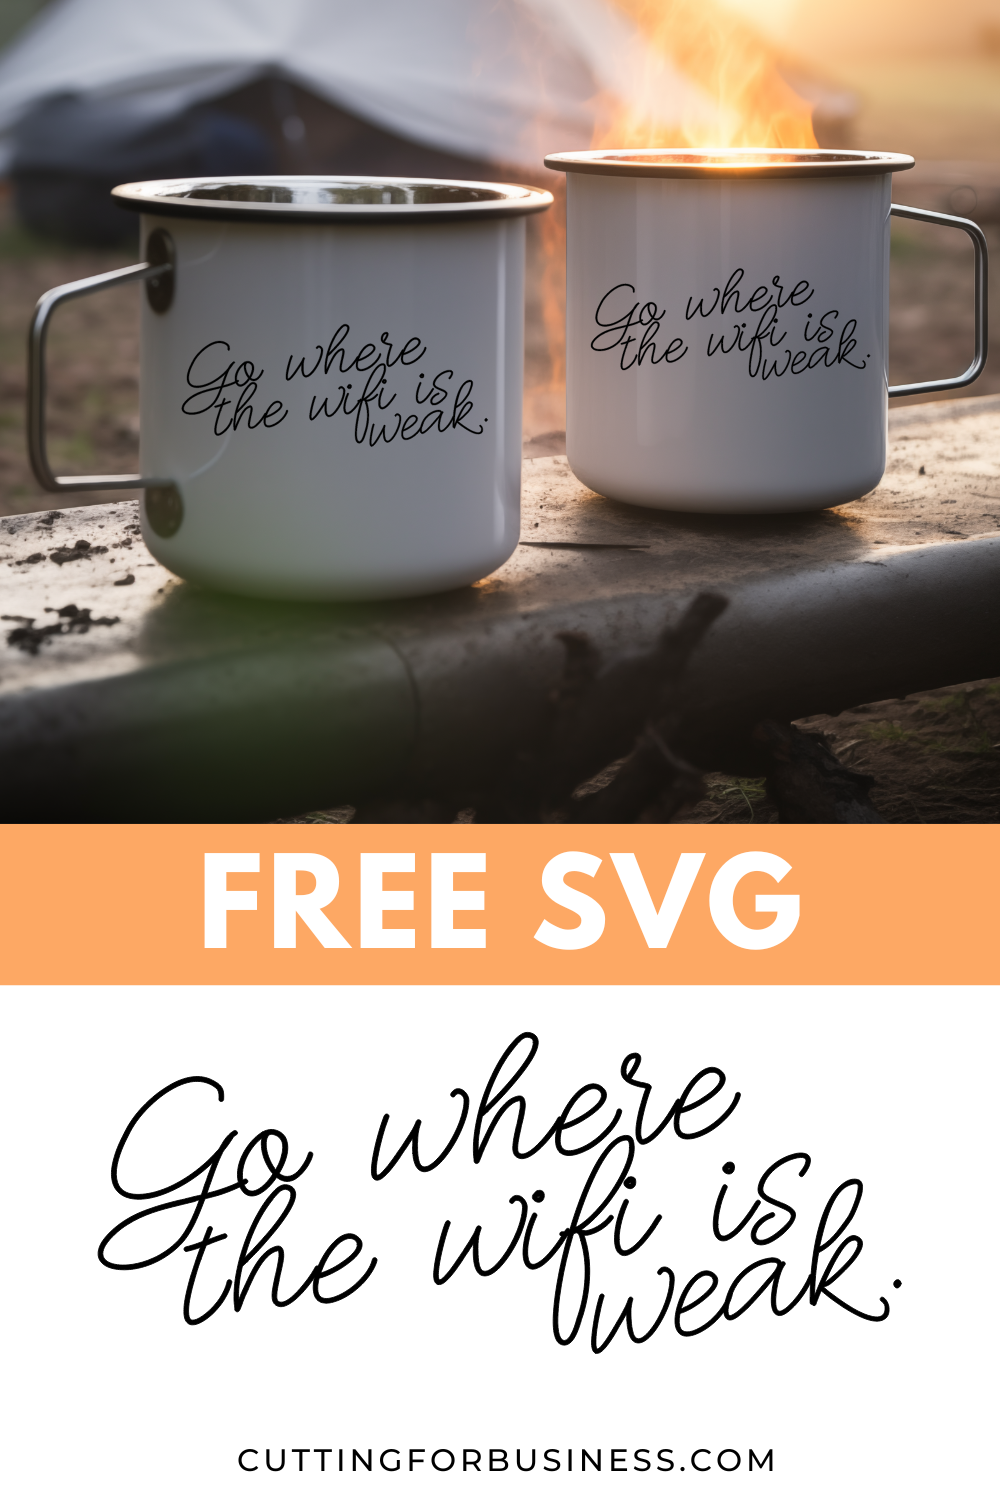 Free SVG - Go Where the Wifi is Weak - cuttingforbusiness.com